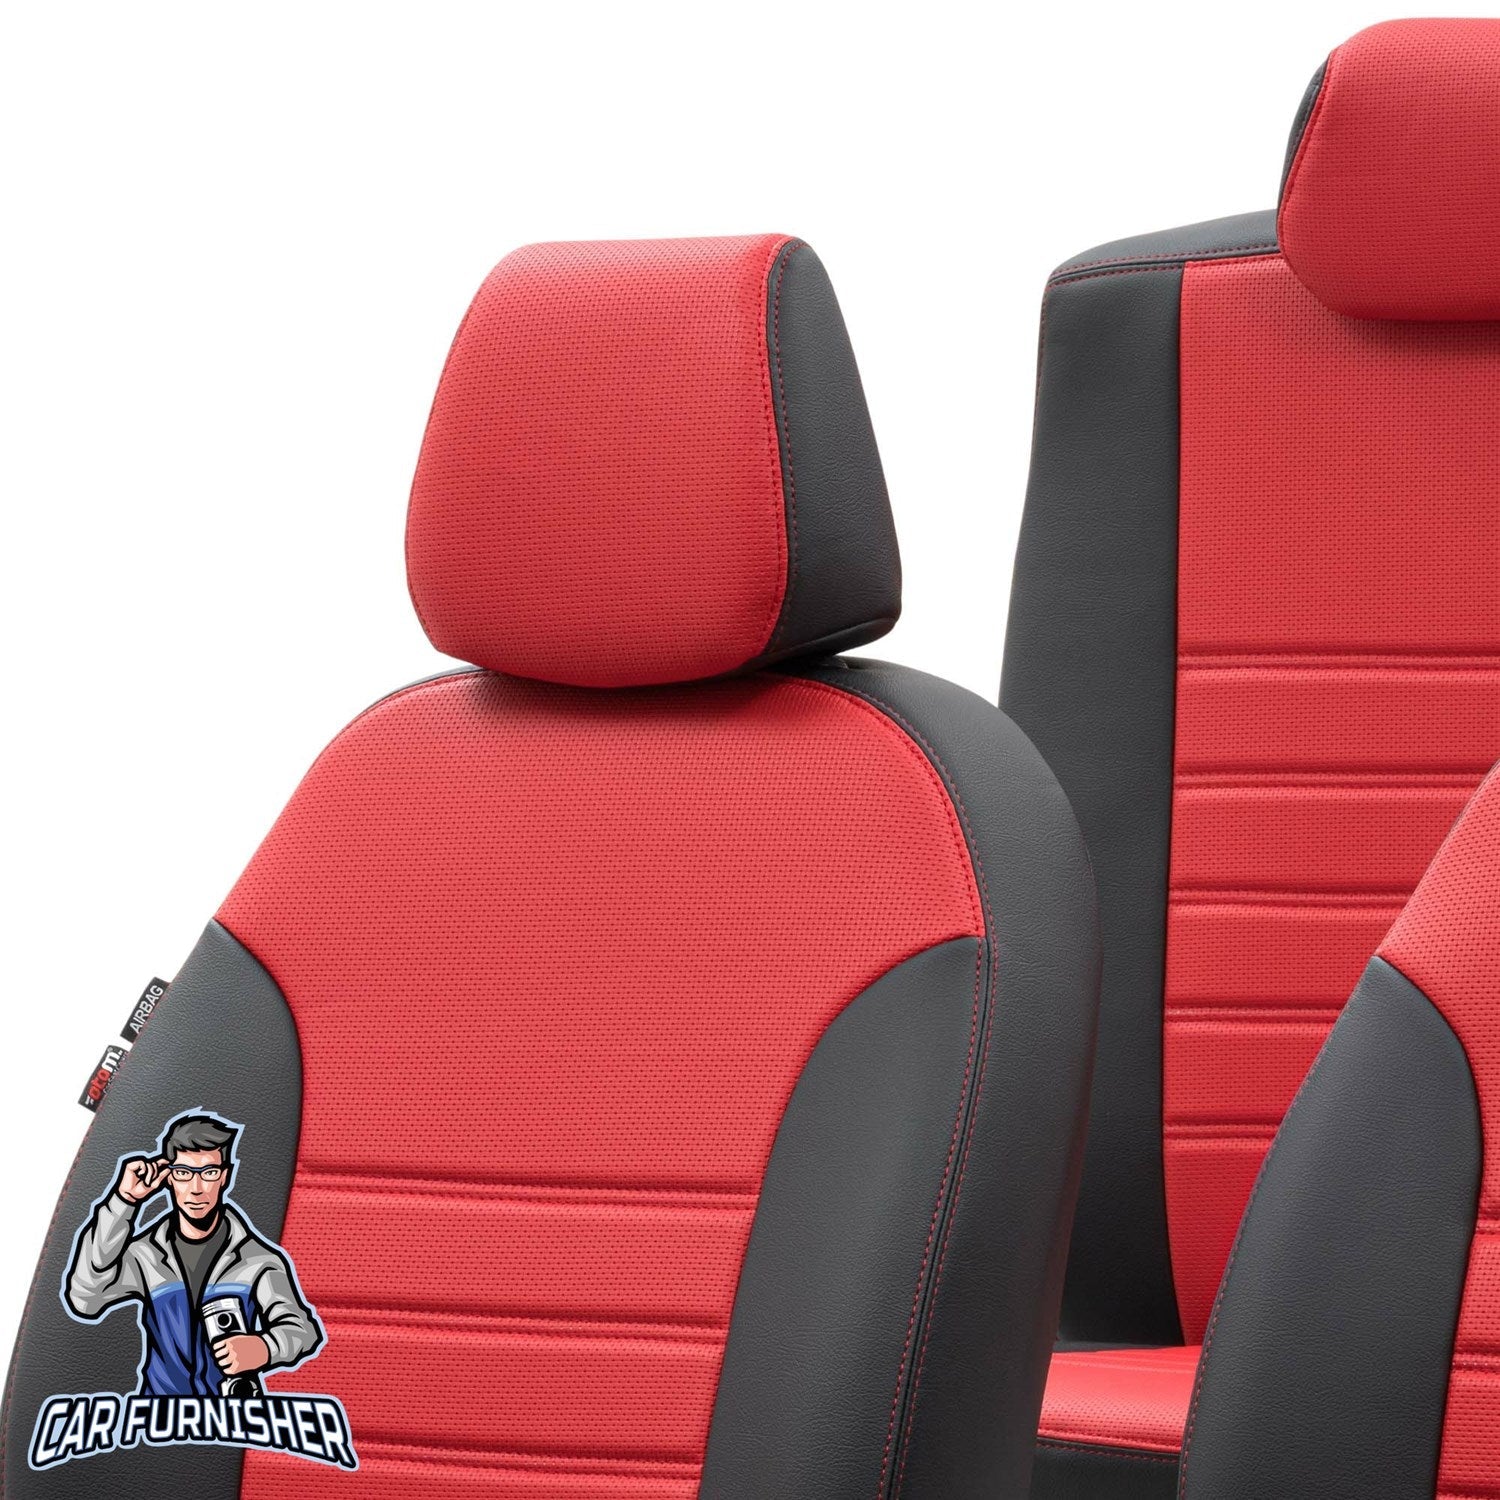 Mercedes CLS Seat Covers New York Leather Design Red Leather